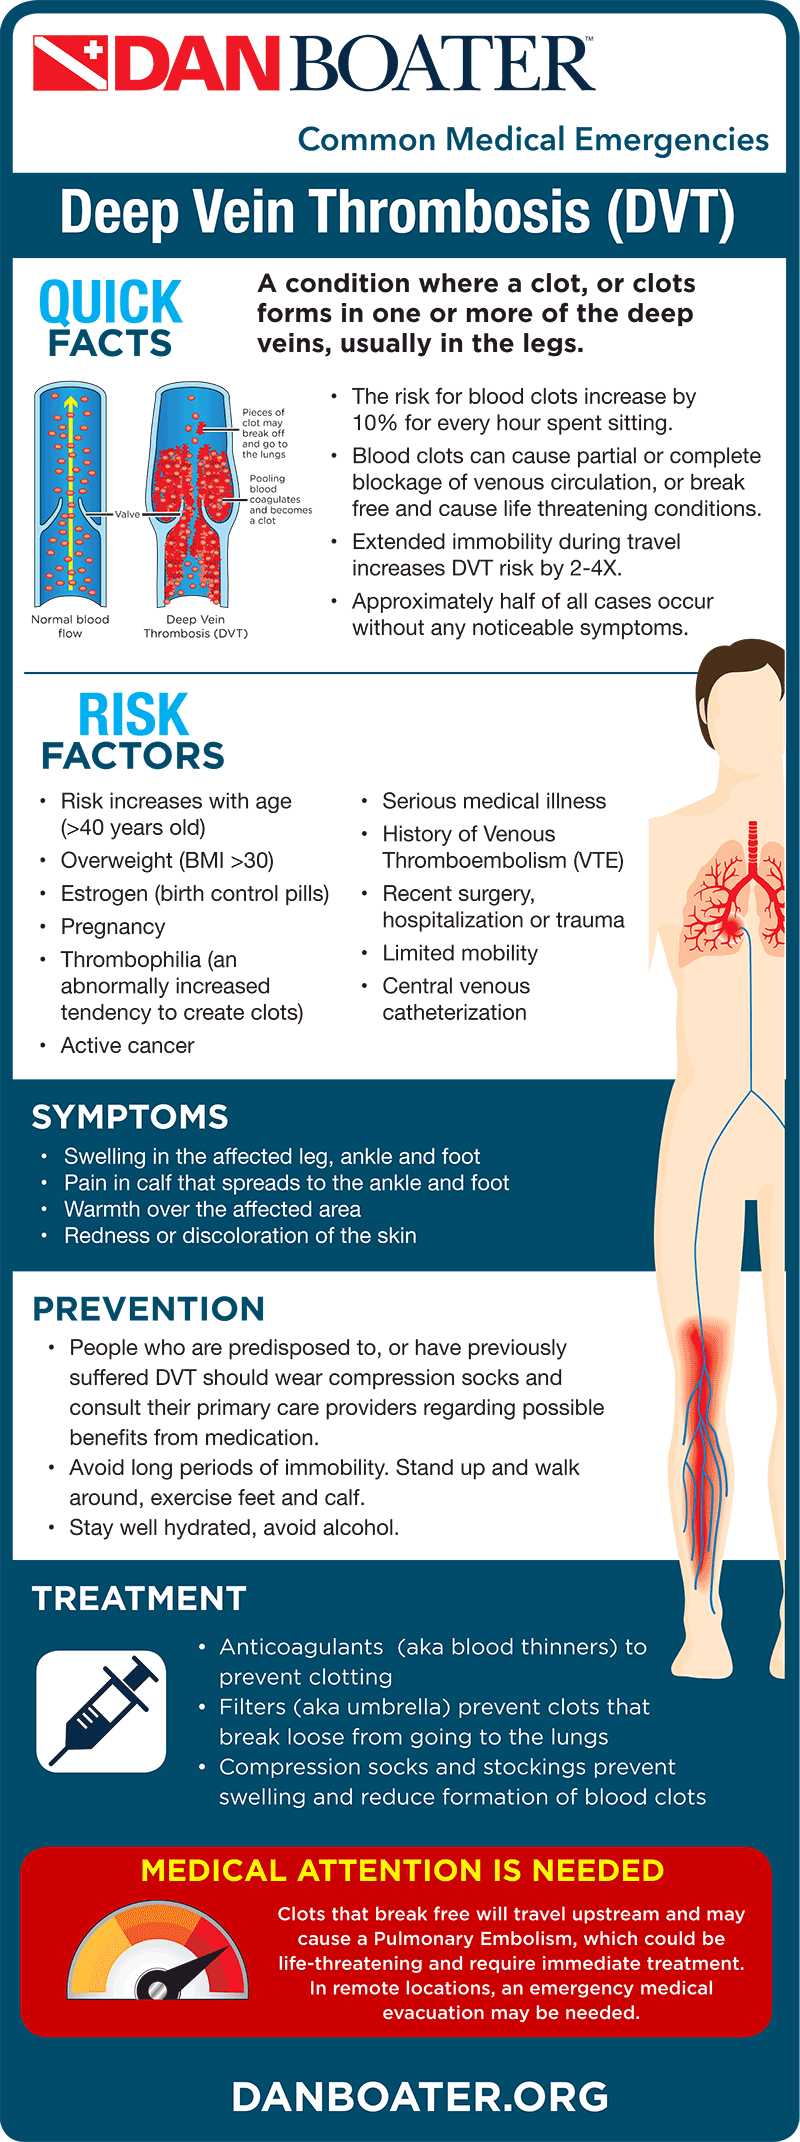 Travel Health Tips for Deep Vein Thrombosis (infographic)